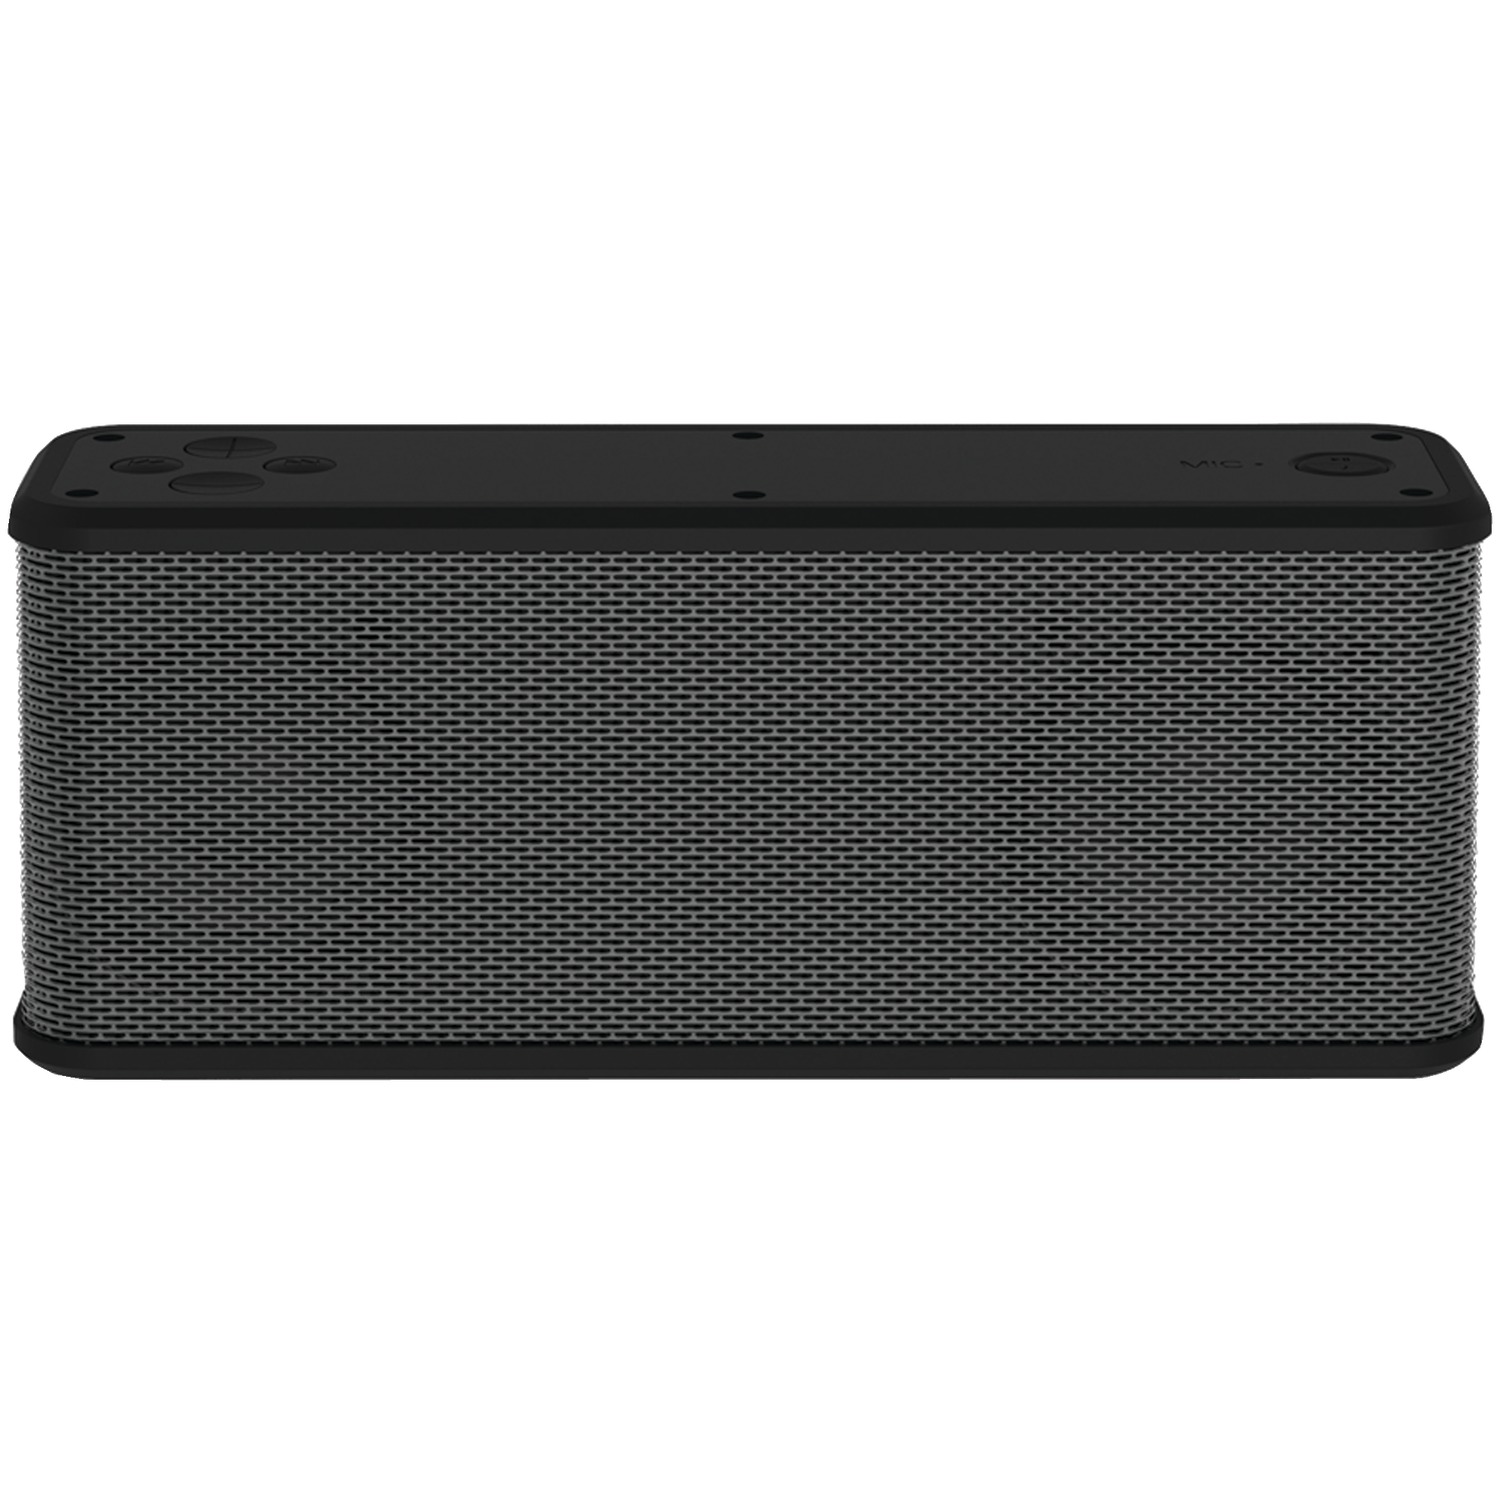 Ematic RuggedLife Bluetooth Speaker with Power Bank (ESR102) - image 1 of 7